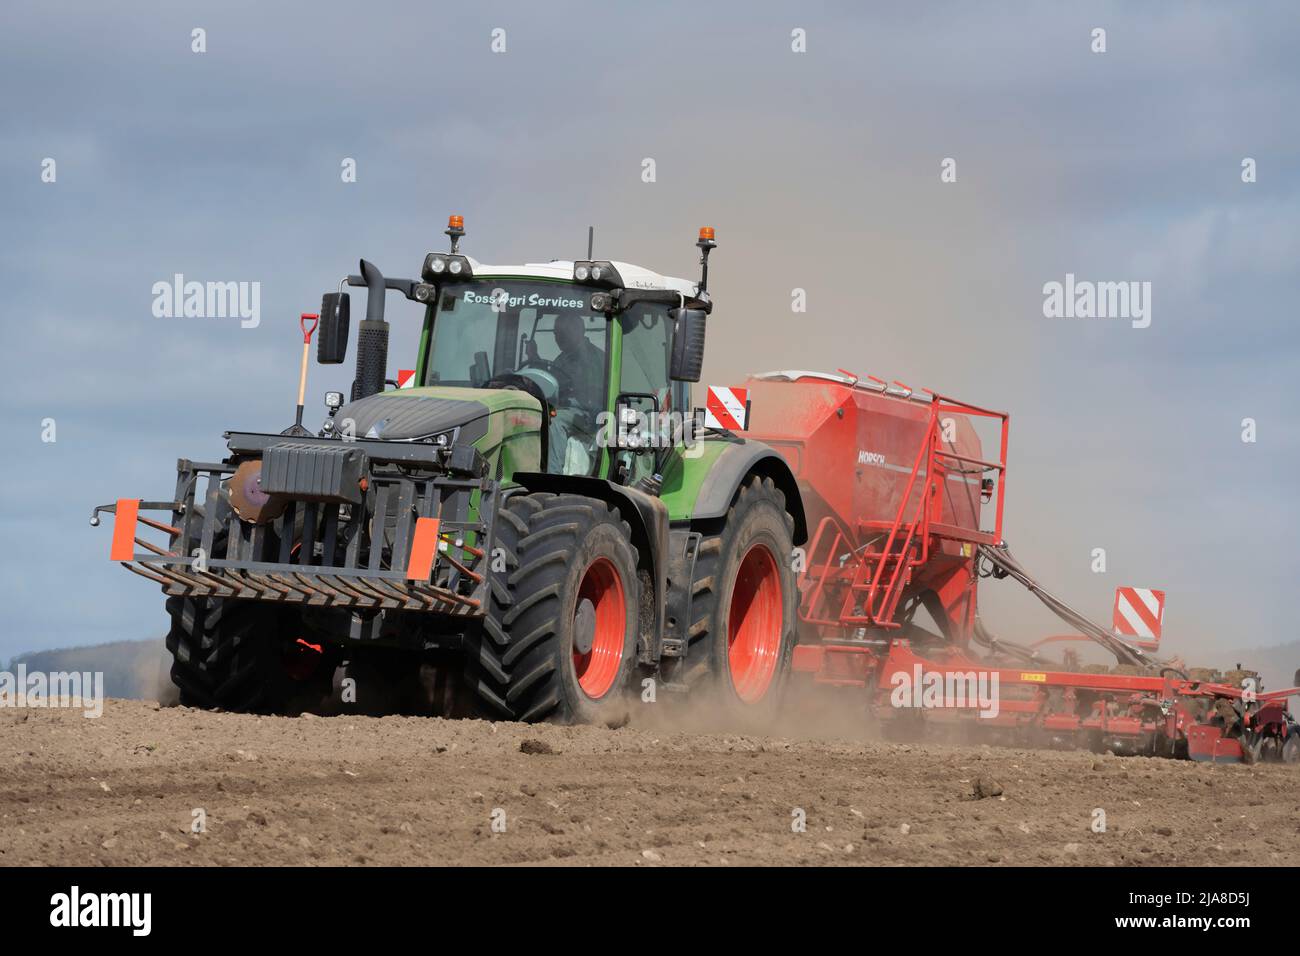 A Green Fendt Tractor Creating Clouds of Dust as it Works with a Horsch Universal Seed Drill in a Dry Ploughed Field Stock Photo